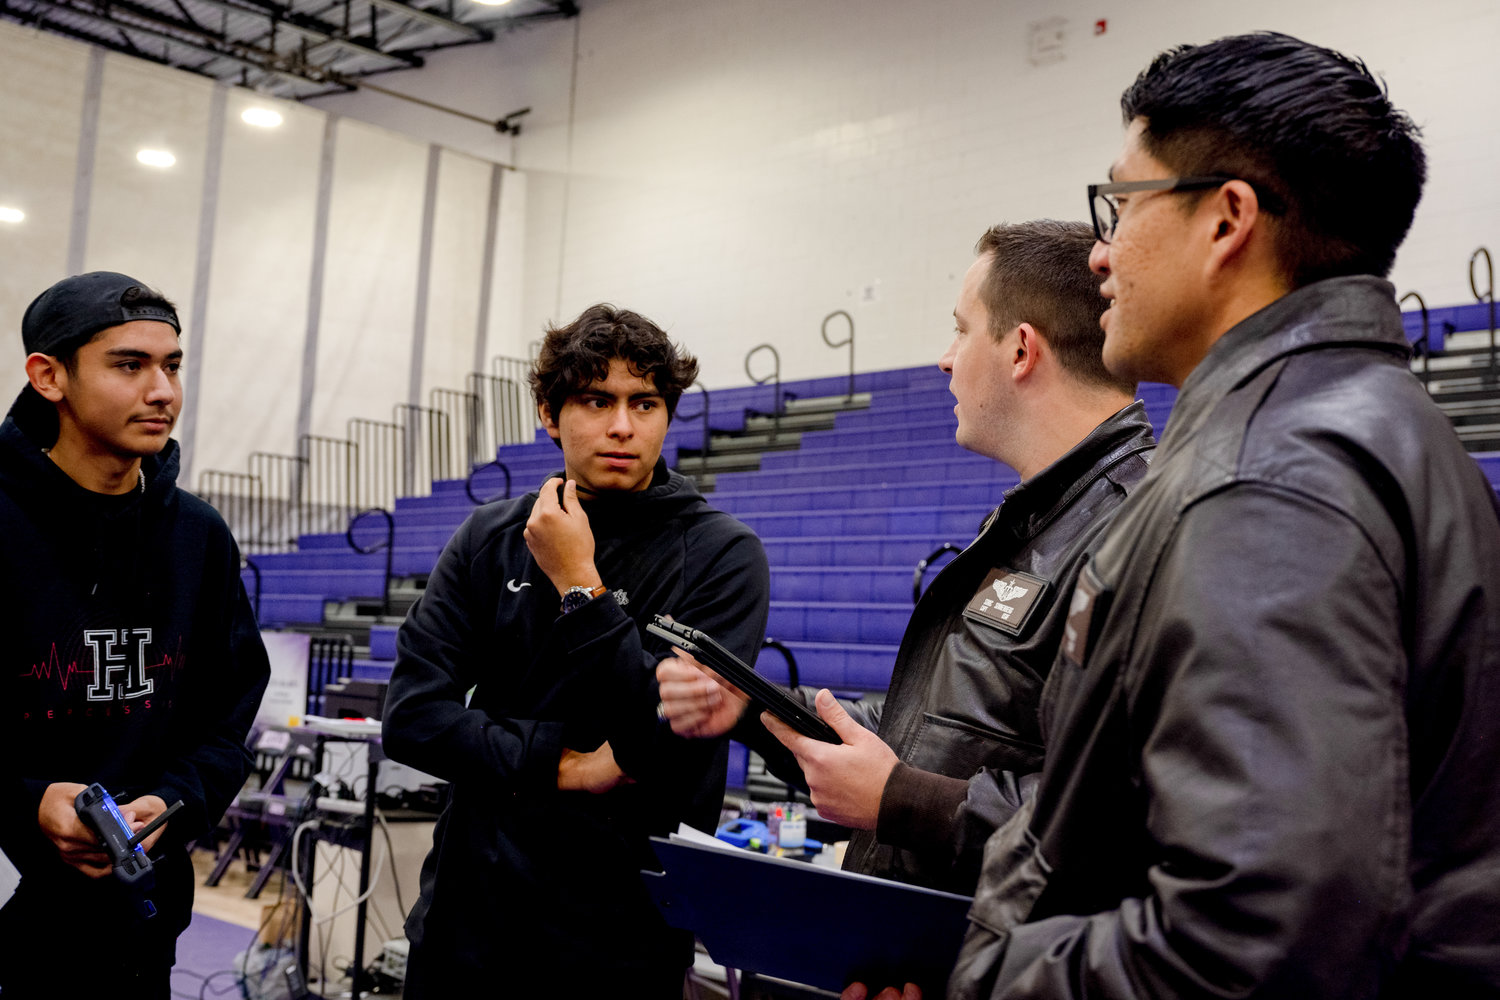 Airmen from the 29th Attack Squadron discuss the scoring process with students from the J.M. Hanks High School robotics team, out of El Paso, Texas, during the first Aerial Drone Competition at Mescalero Apache High School, Jan. 21, 2023. The 29th Attack Squadron served as judges and referees for this event, as well as mentors for the students, providing guidance throughout the competition. (U.S. Air Force photo by Senior Airman Antonio Salfran)